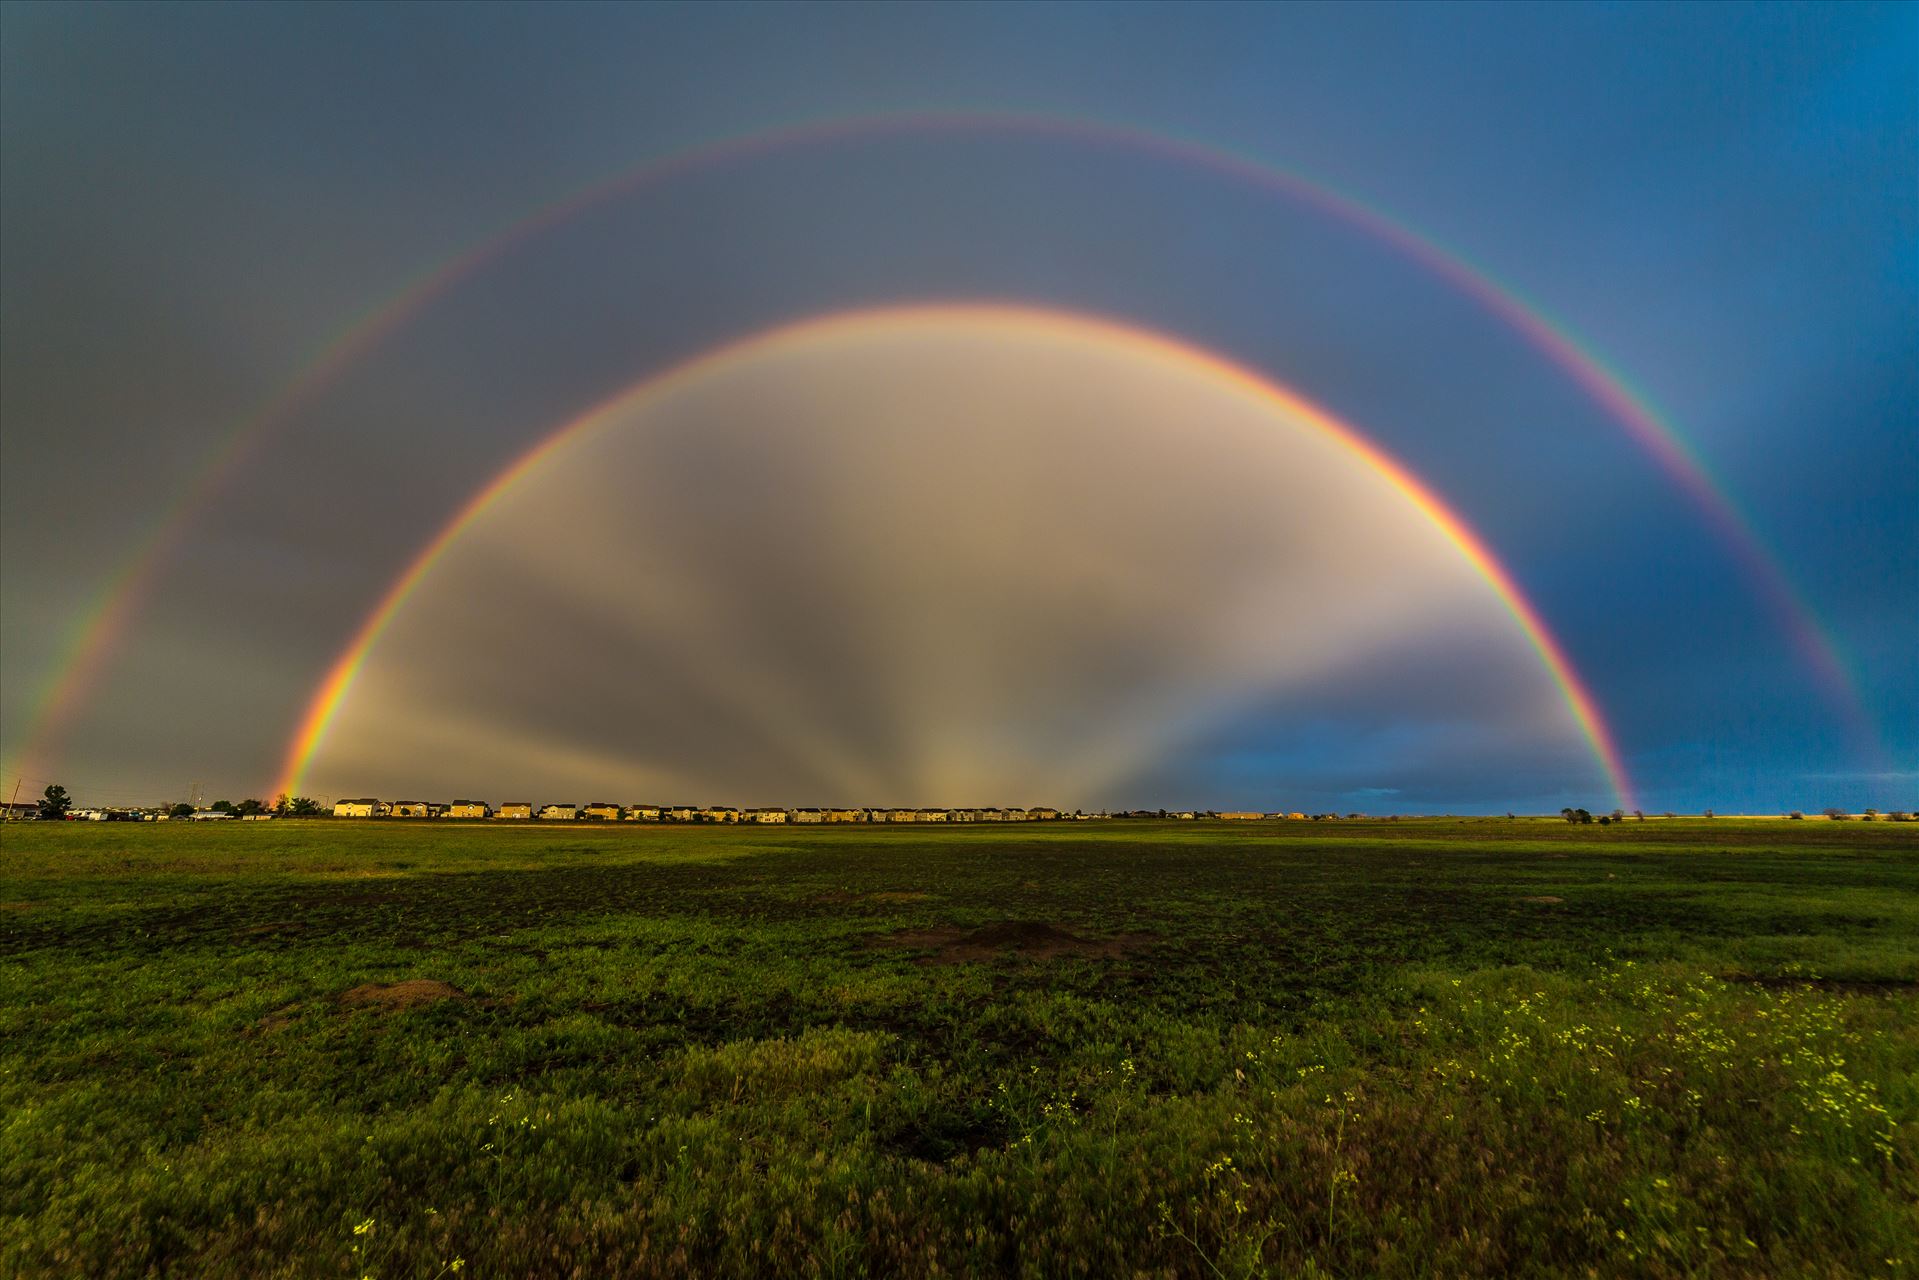 Double Rainbow with Anti-Crepuscular Rays - After a hard rain and a bit of hail, anti-crepuscular rays appear to cast from the center of a double rainbow, near Reunion, Colorado. by Scott Smith Photos